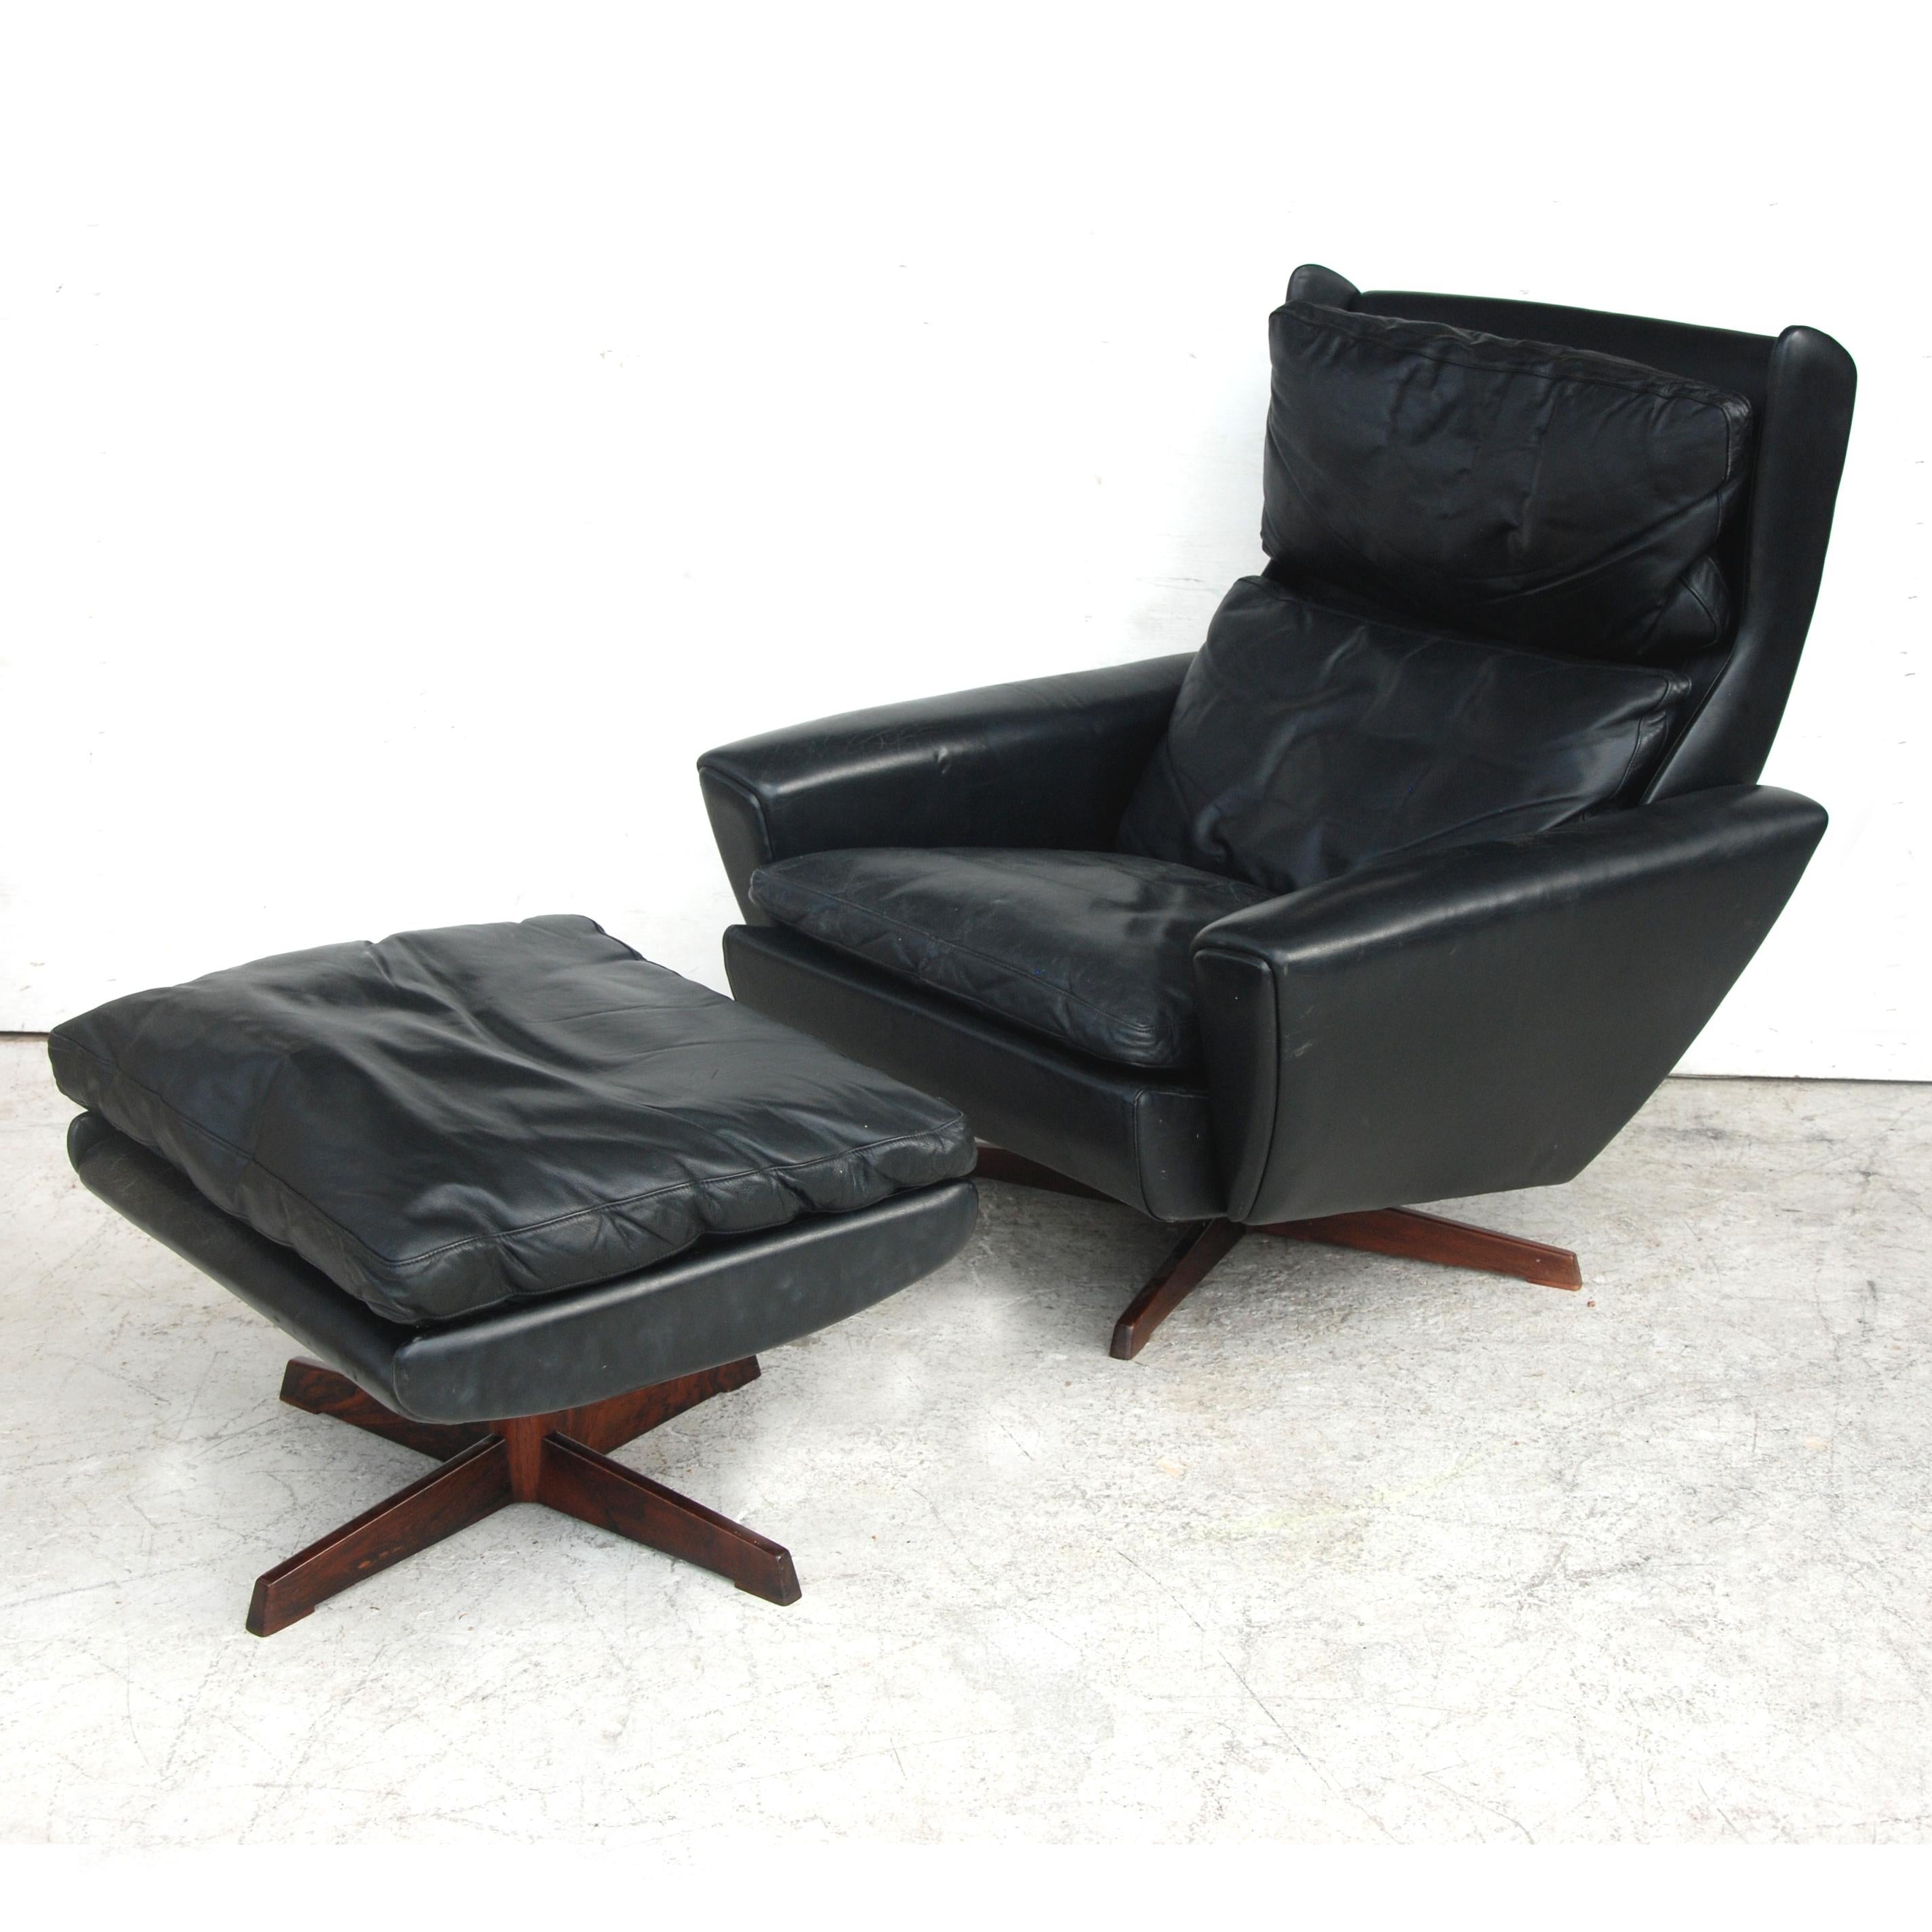 Rosewood lounge chair and ottoman by Georg Thams for Vejen Polstermøbelfabrik

Very comfortable vintage 1960s leather lounge chair and ottoman designed by Georg Thams for A/S Vejen, Denmark. Features solid rosewood legs and its original leather